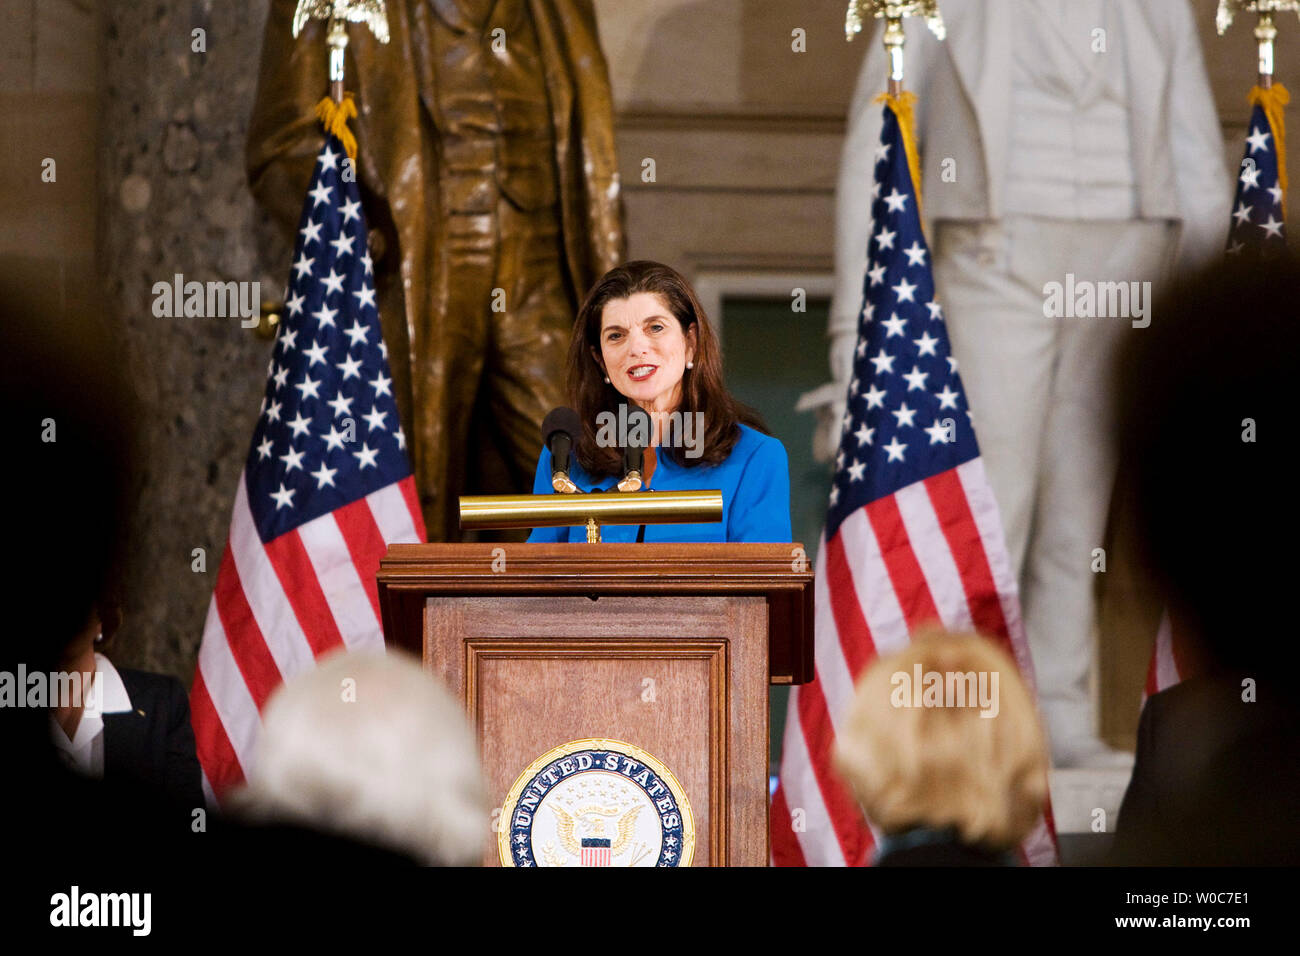 Luci Baines Johnson, daughter of President Lyndon B. Johnson, delivers remarks at a lunch-in ceremony to mark President Johnson's 100th birthday on Capitol Hill in Washington on May 21, 2008. (UPI Photo/Patrick D. McDermott) Stock Photo